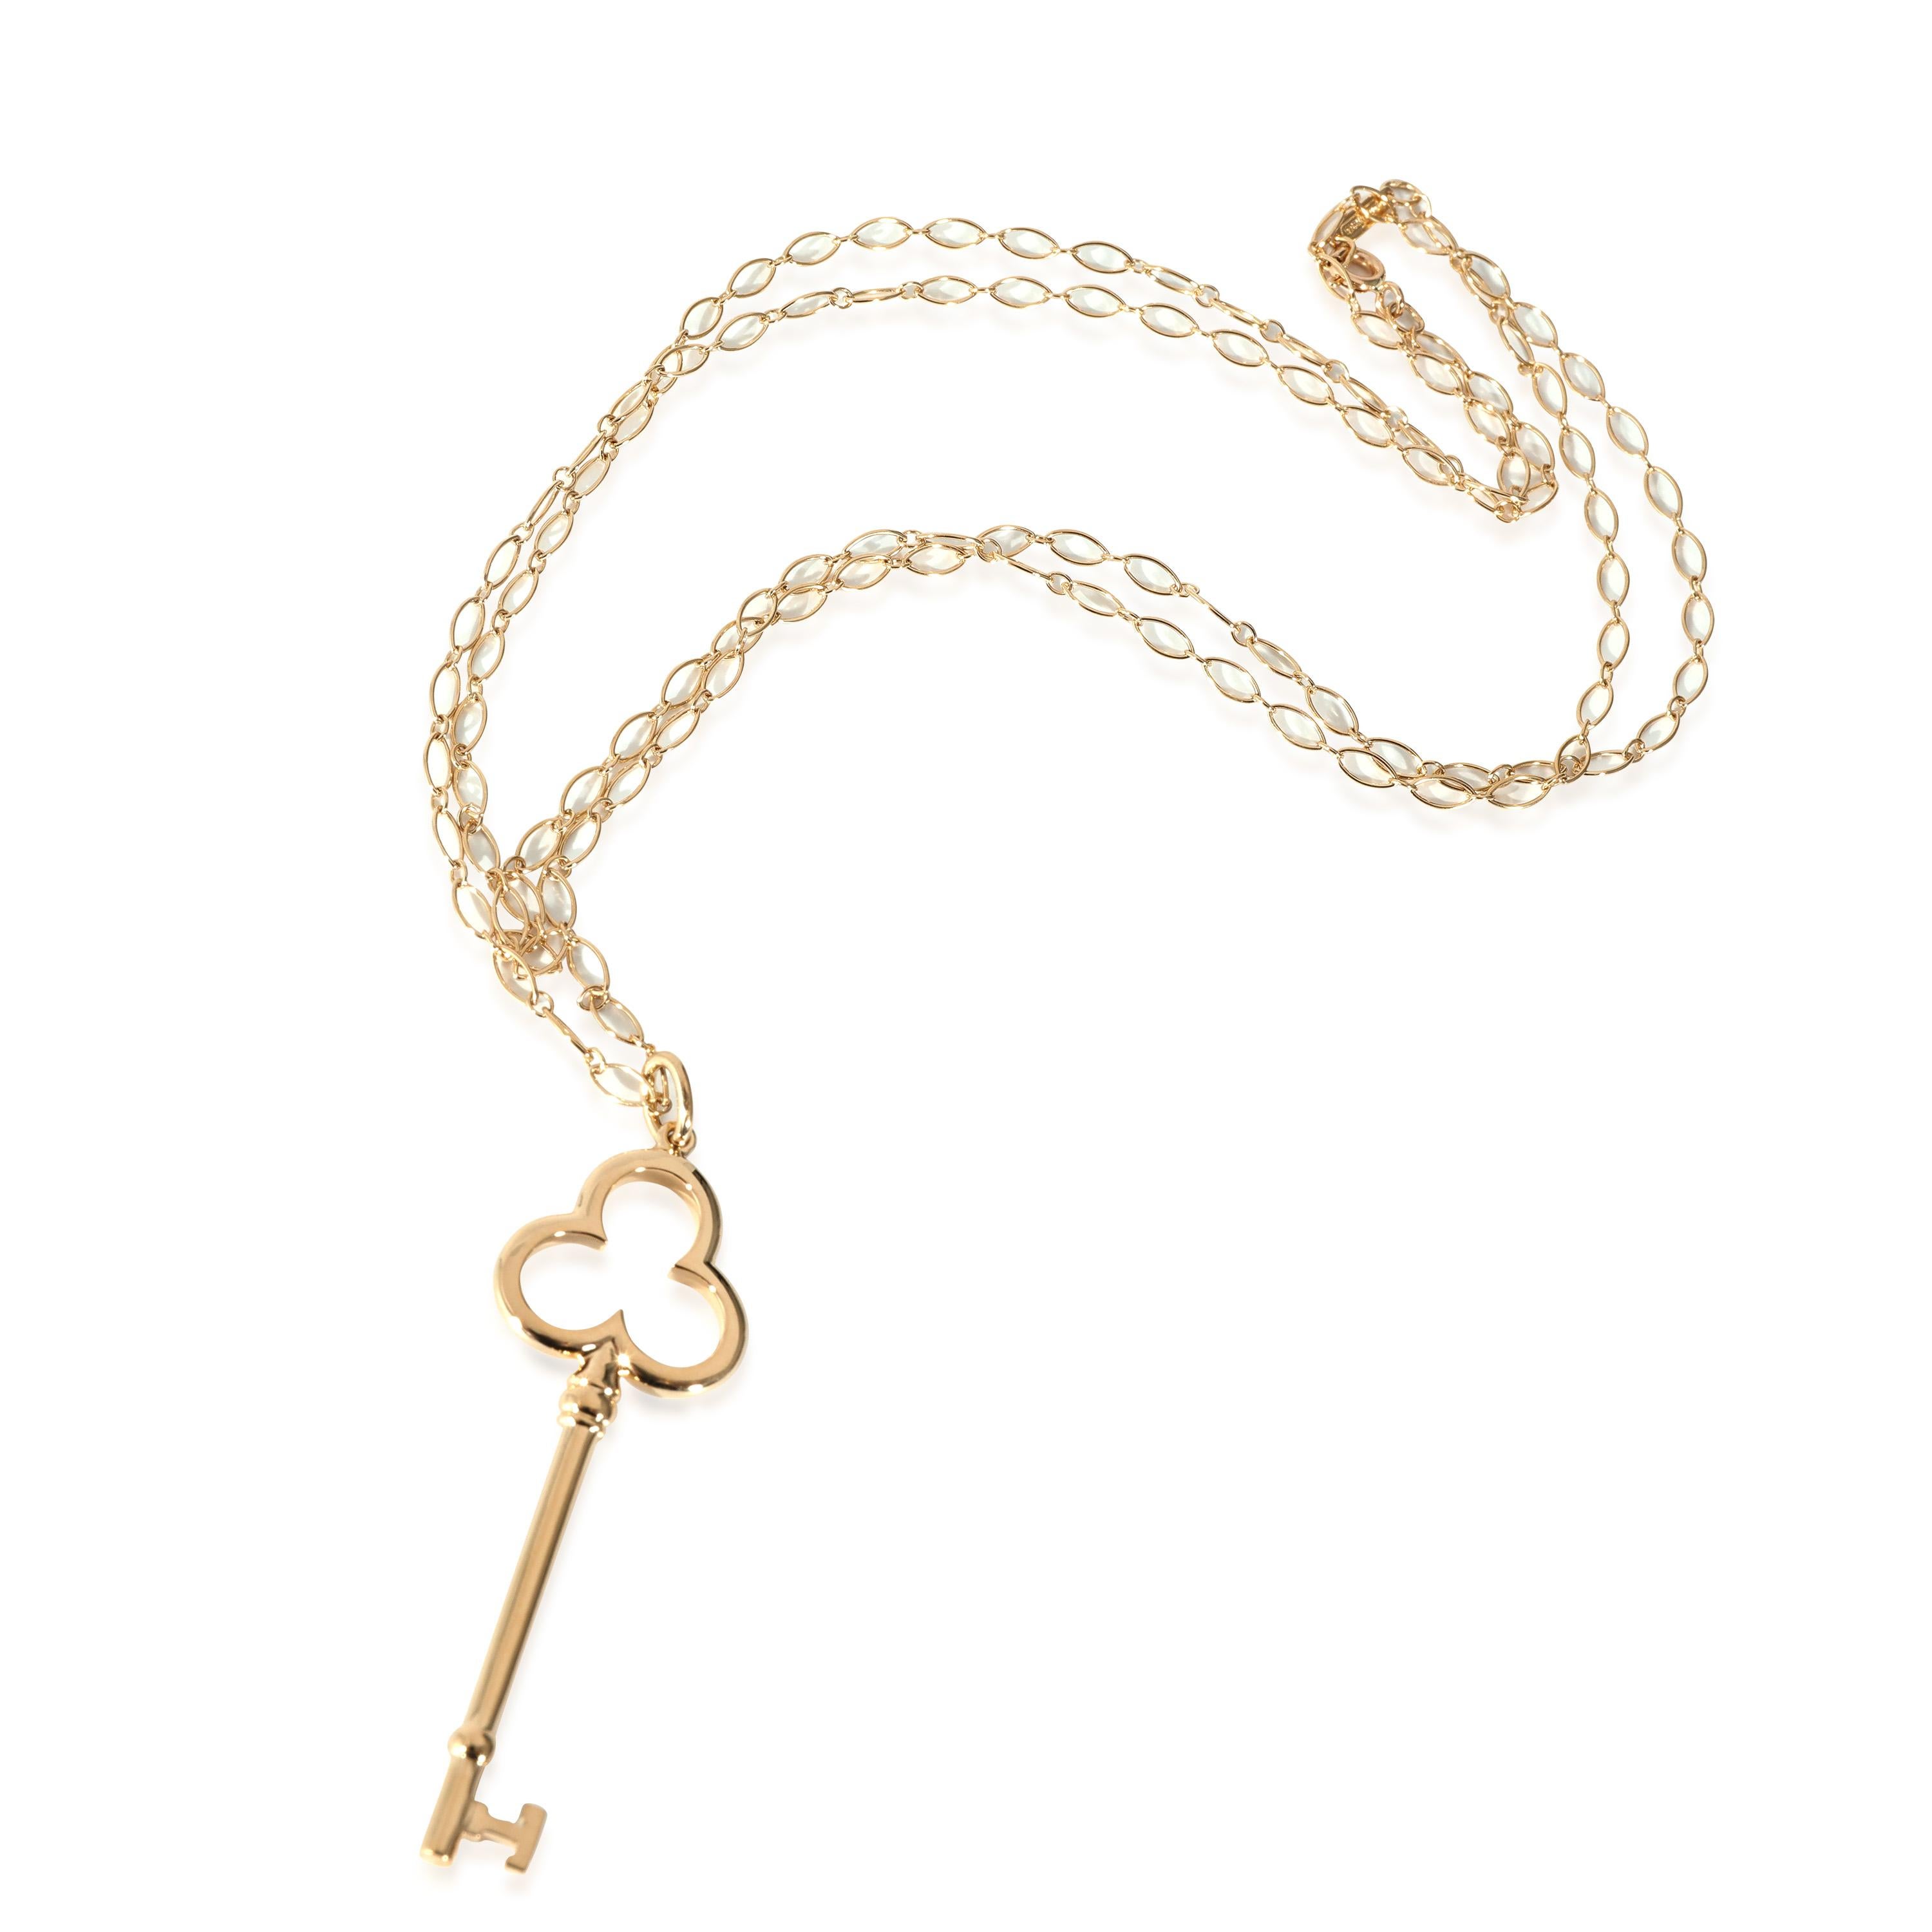 Tiffany & Co. Trefoil Key Pendant Necklace in 18KT Yellow Gold

PRIMARY DETAILS
SKU: 132194
Listing Title: Tiffany & Co. Trefoil Key Pendant Necklace in 18KT Yellow Gold
Condition Description: Tiffany & Co. launched its Keys collection in 2009, but